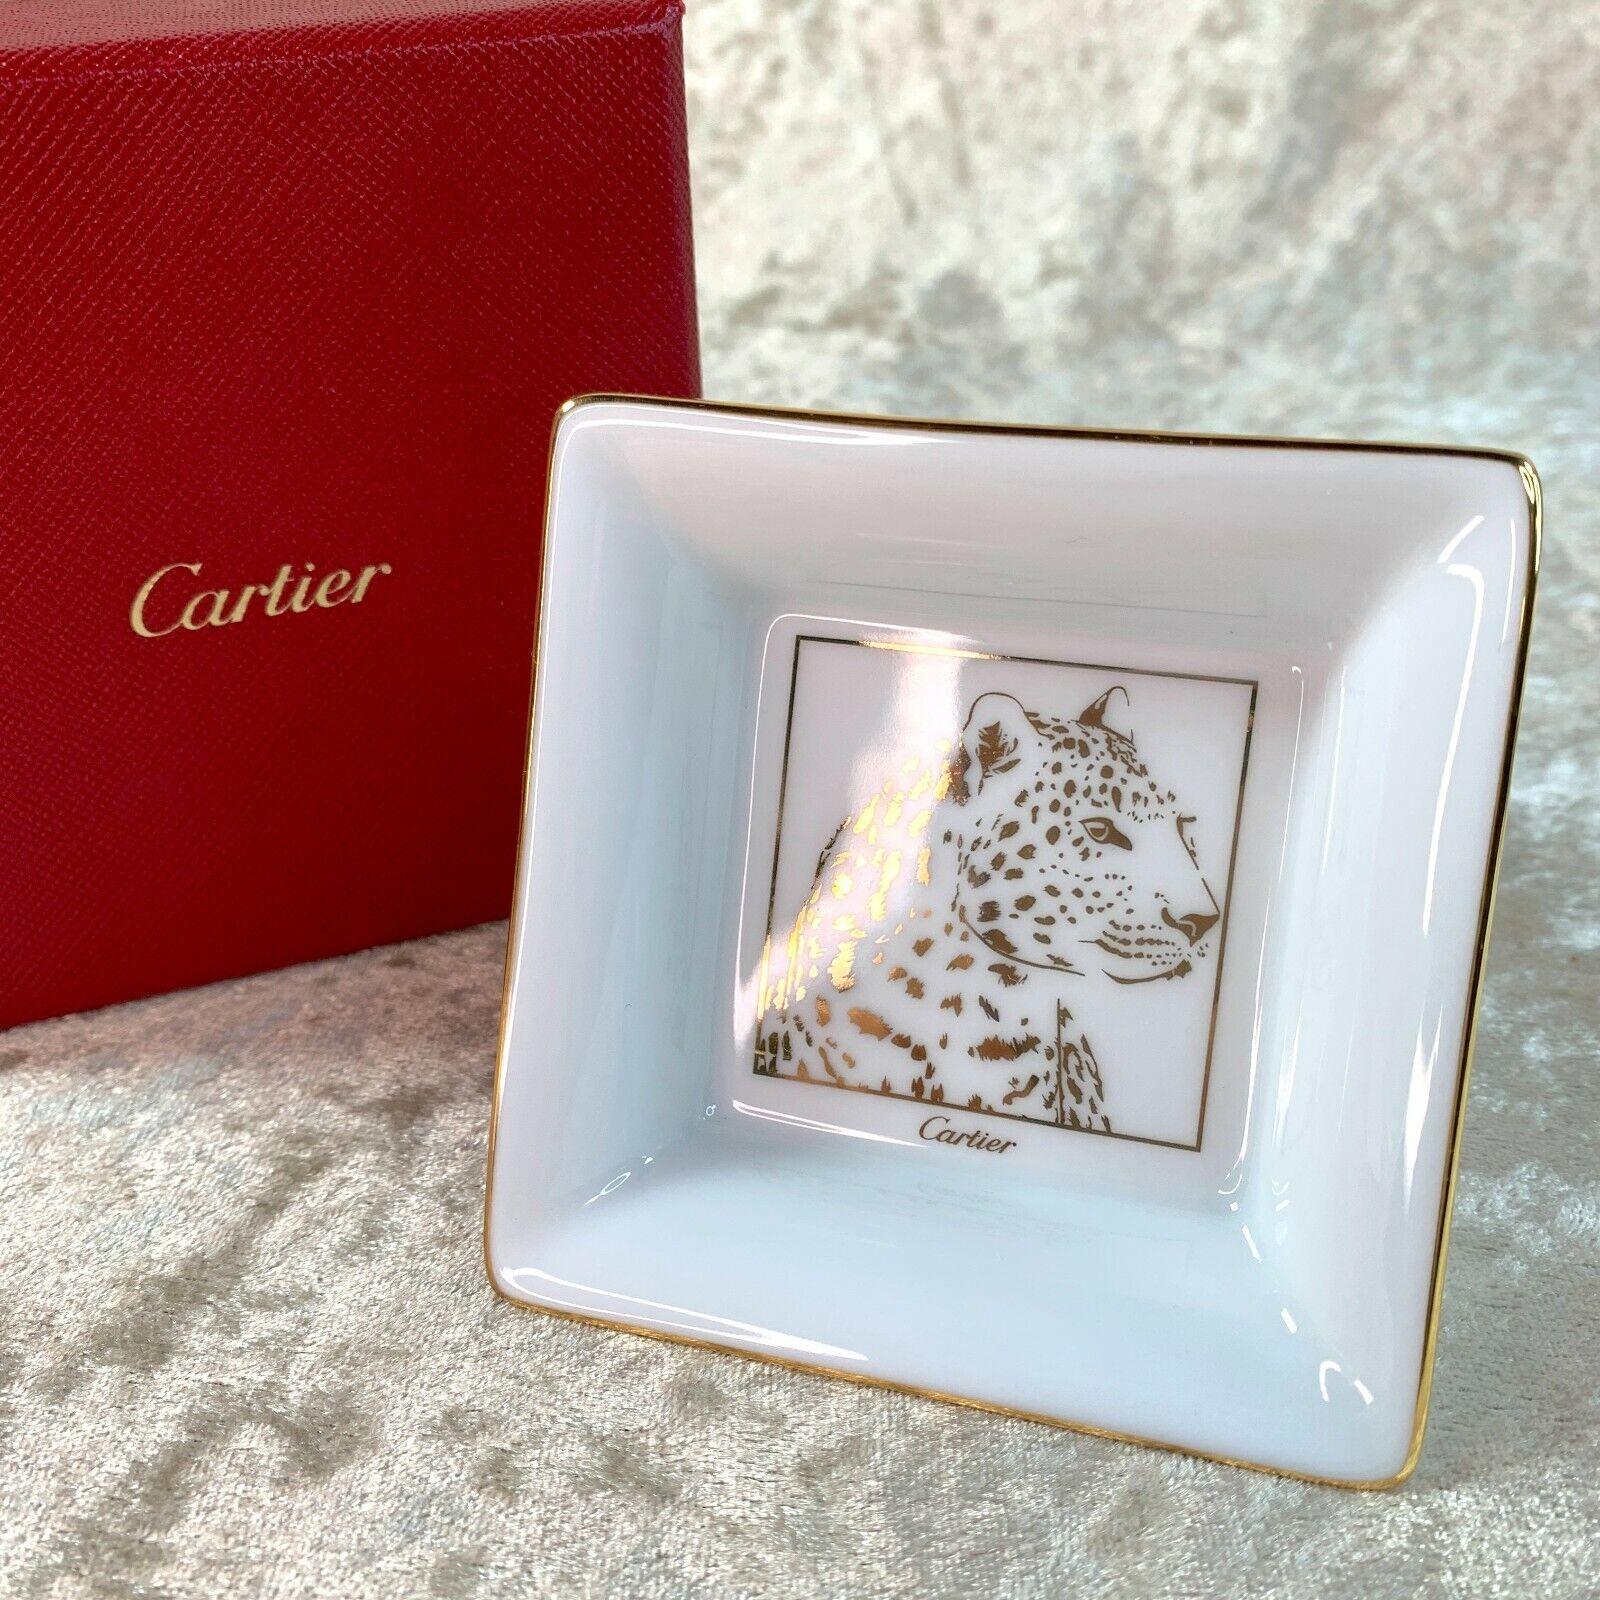 Cartier “Panthera“ Set of Lighter, Ashtray & Silk Scarf For Sale 5